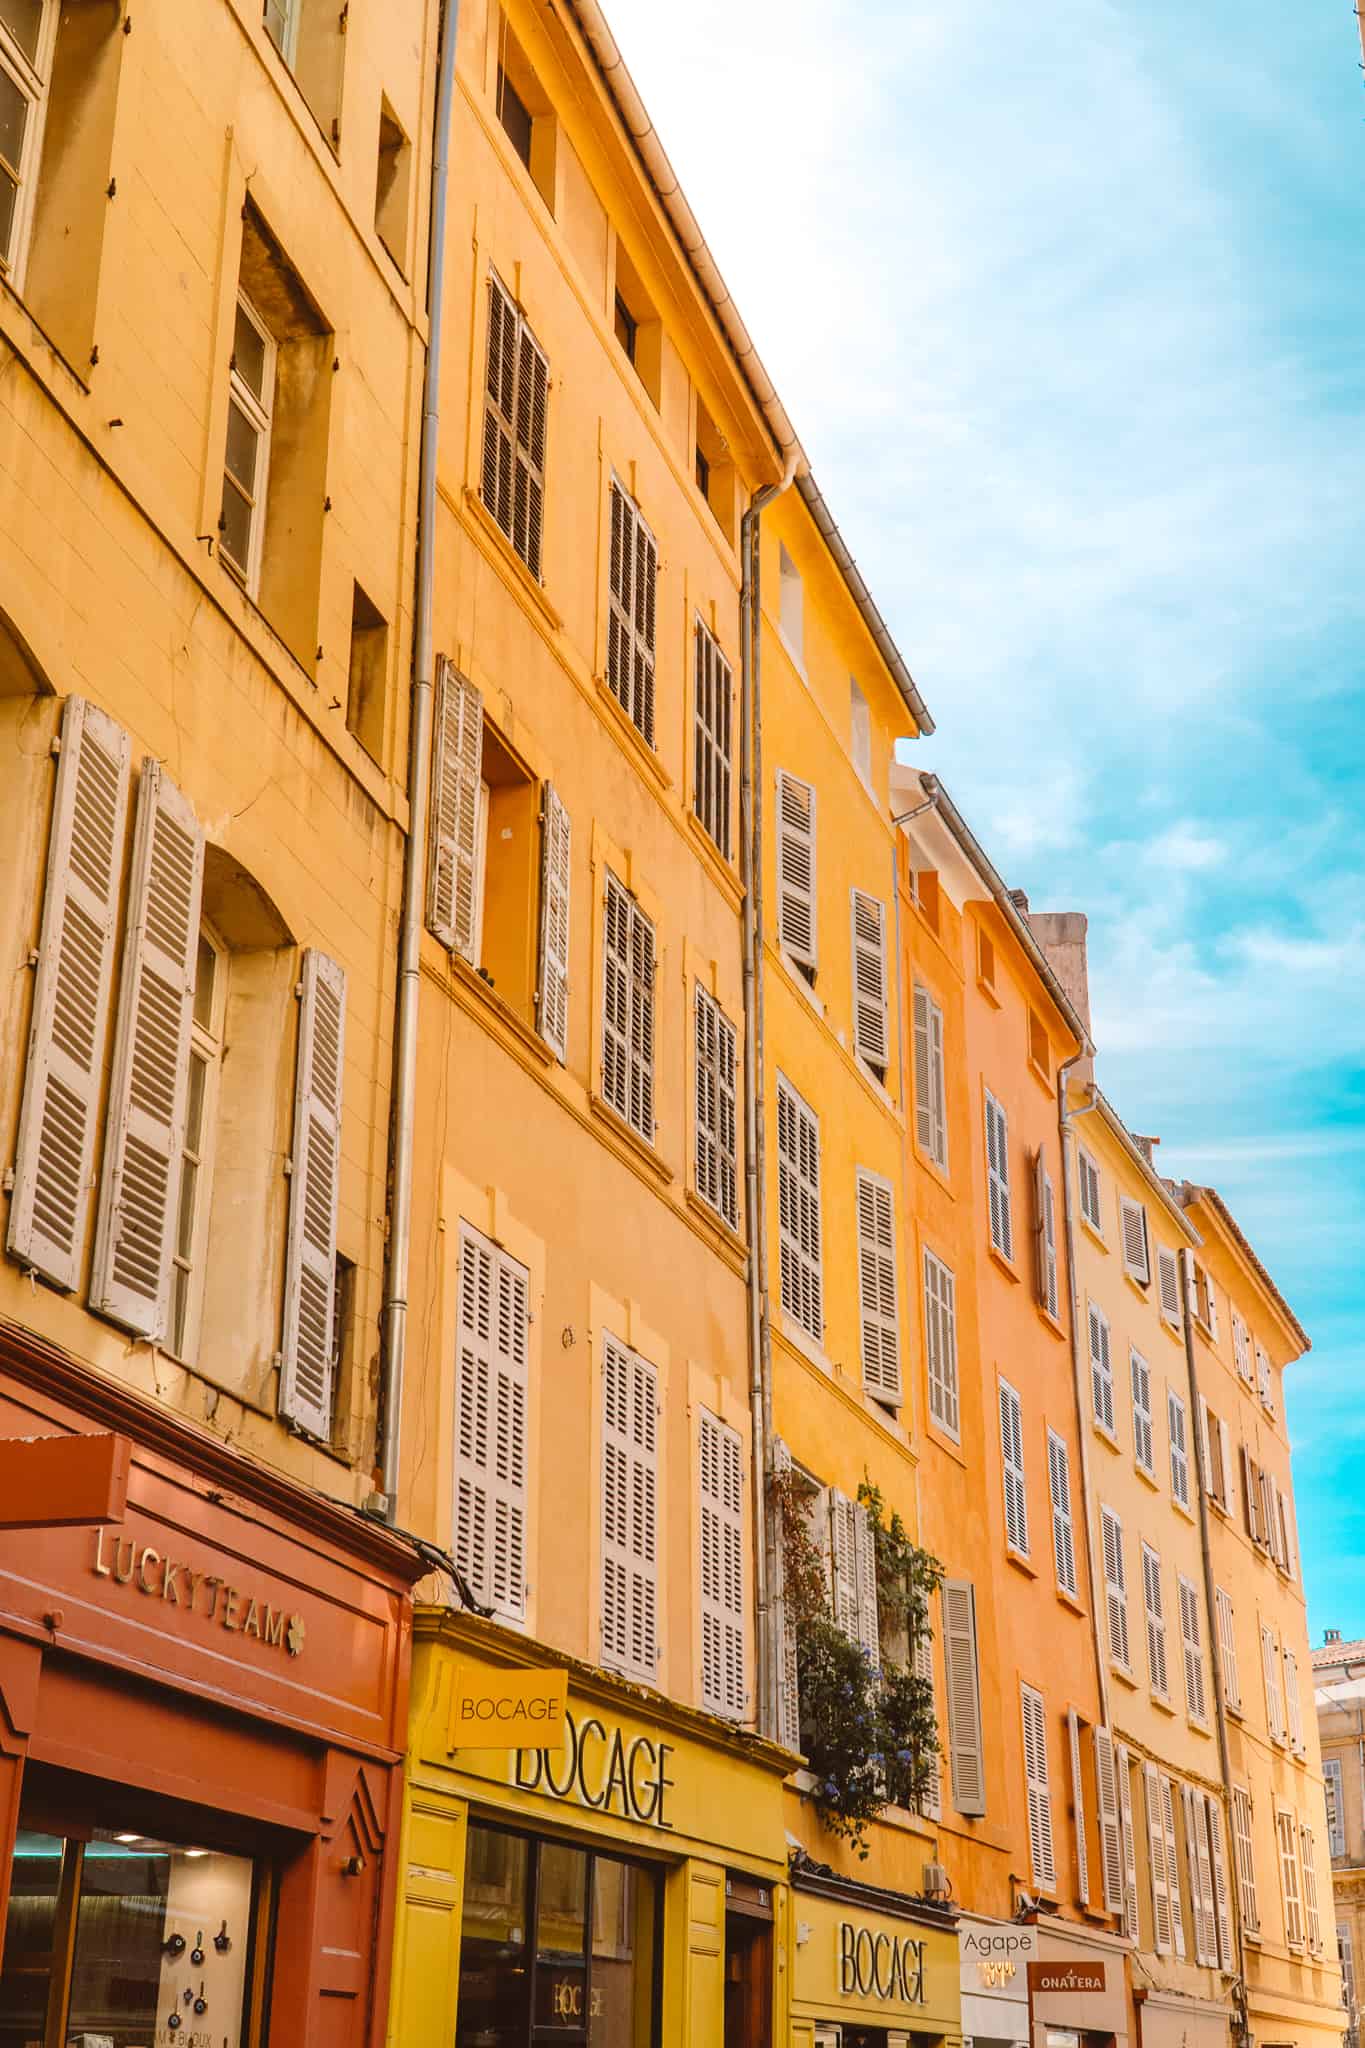 Colorful street of Aix-en-Provence